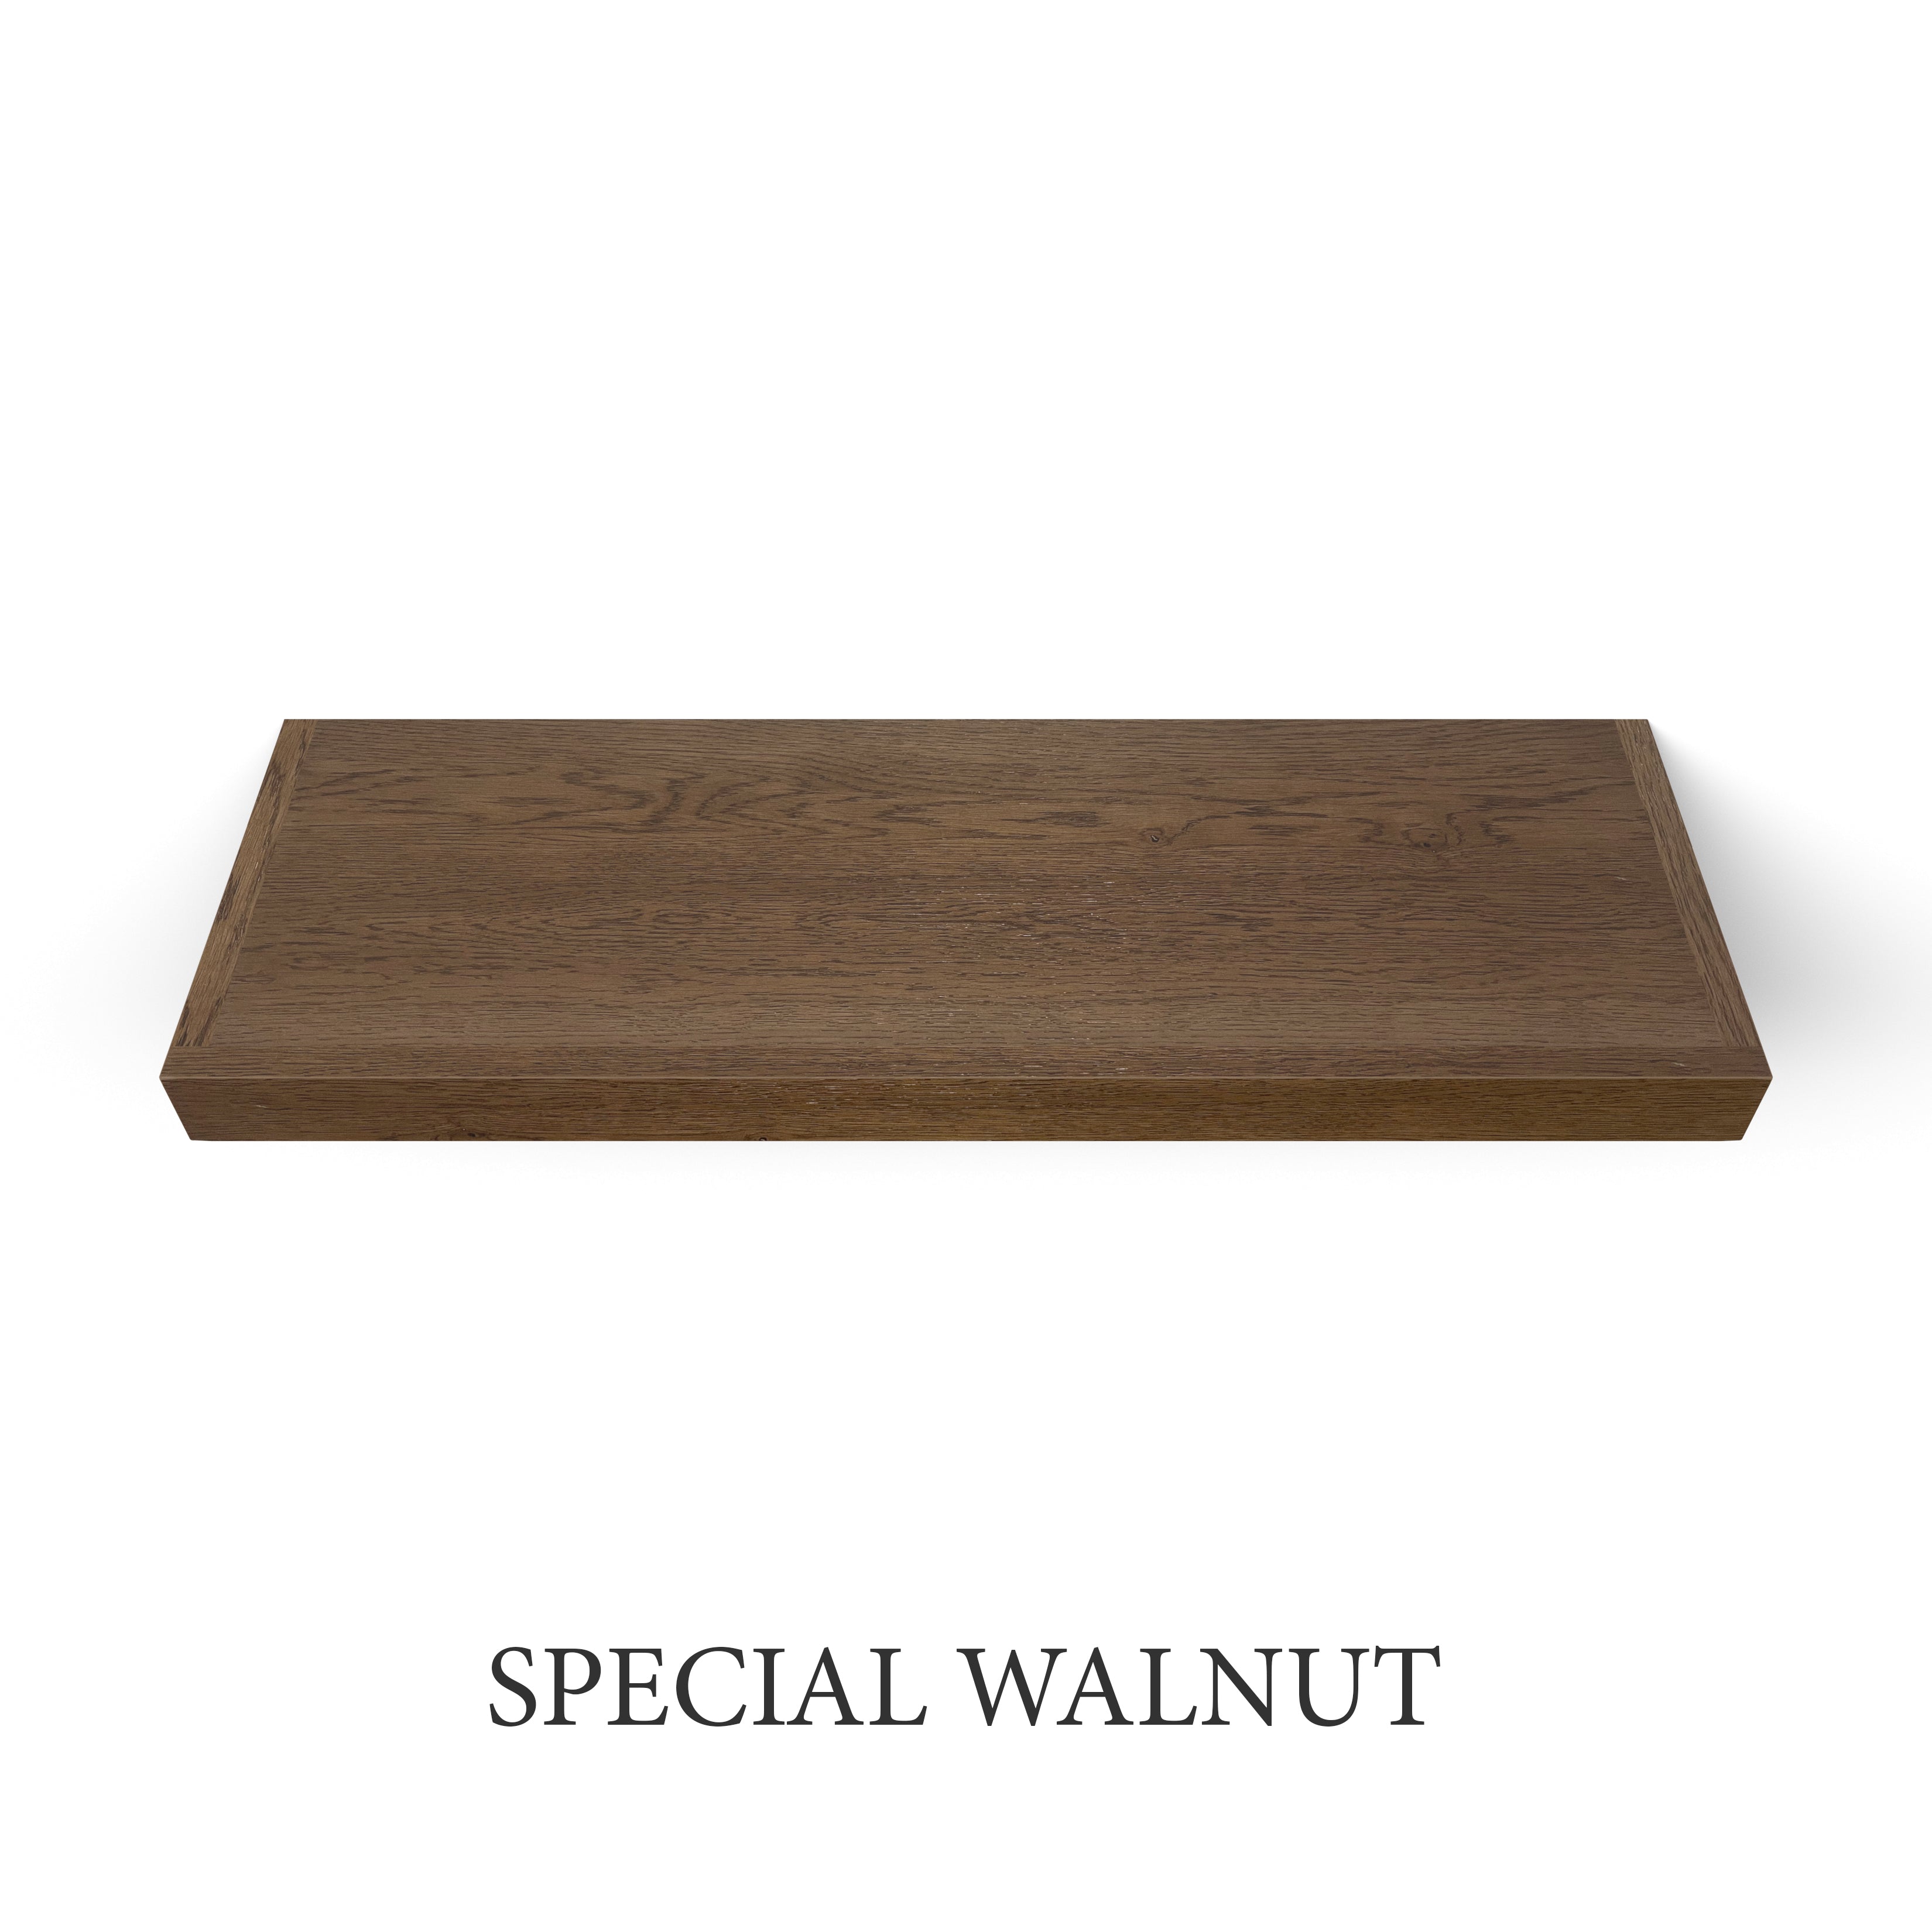 special walnut White Oak 2 Inch Thick LED Lighted Floating Shelf - Battery